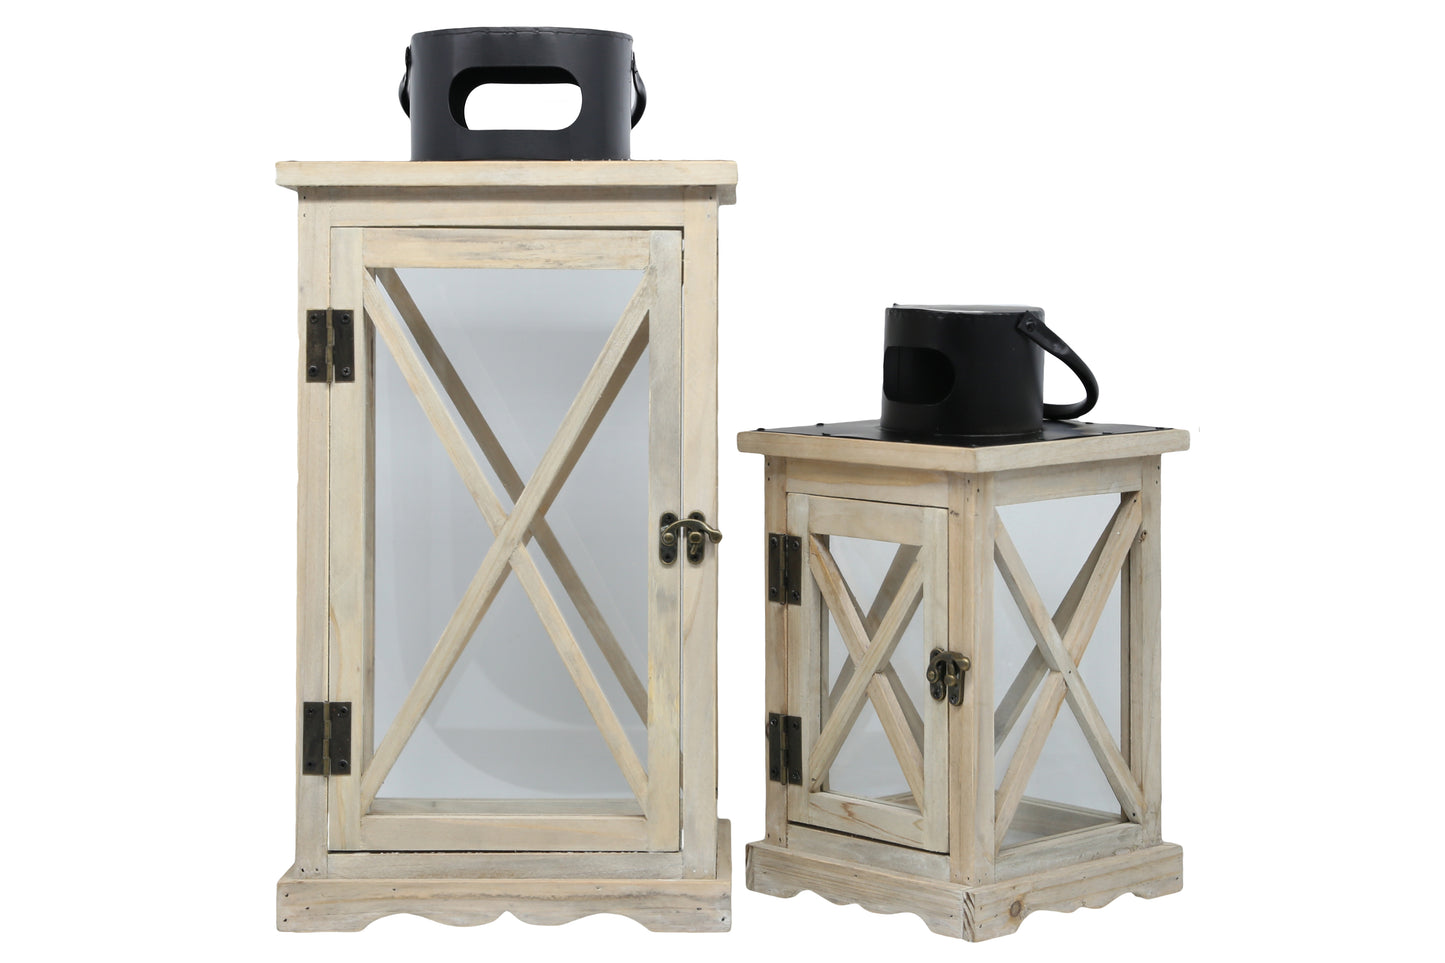 Wood Square Lantern with Black Painted Metal Cap and Ring Hanger, Clear Glass Sides and "X" Design